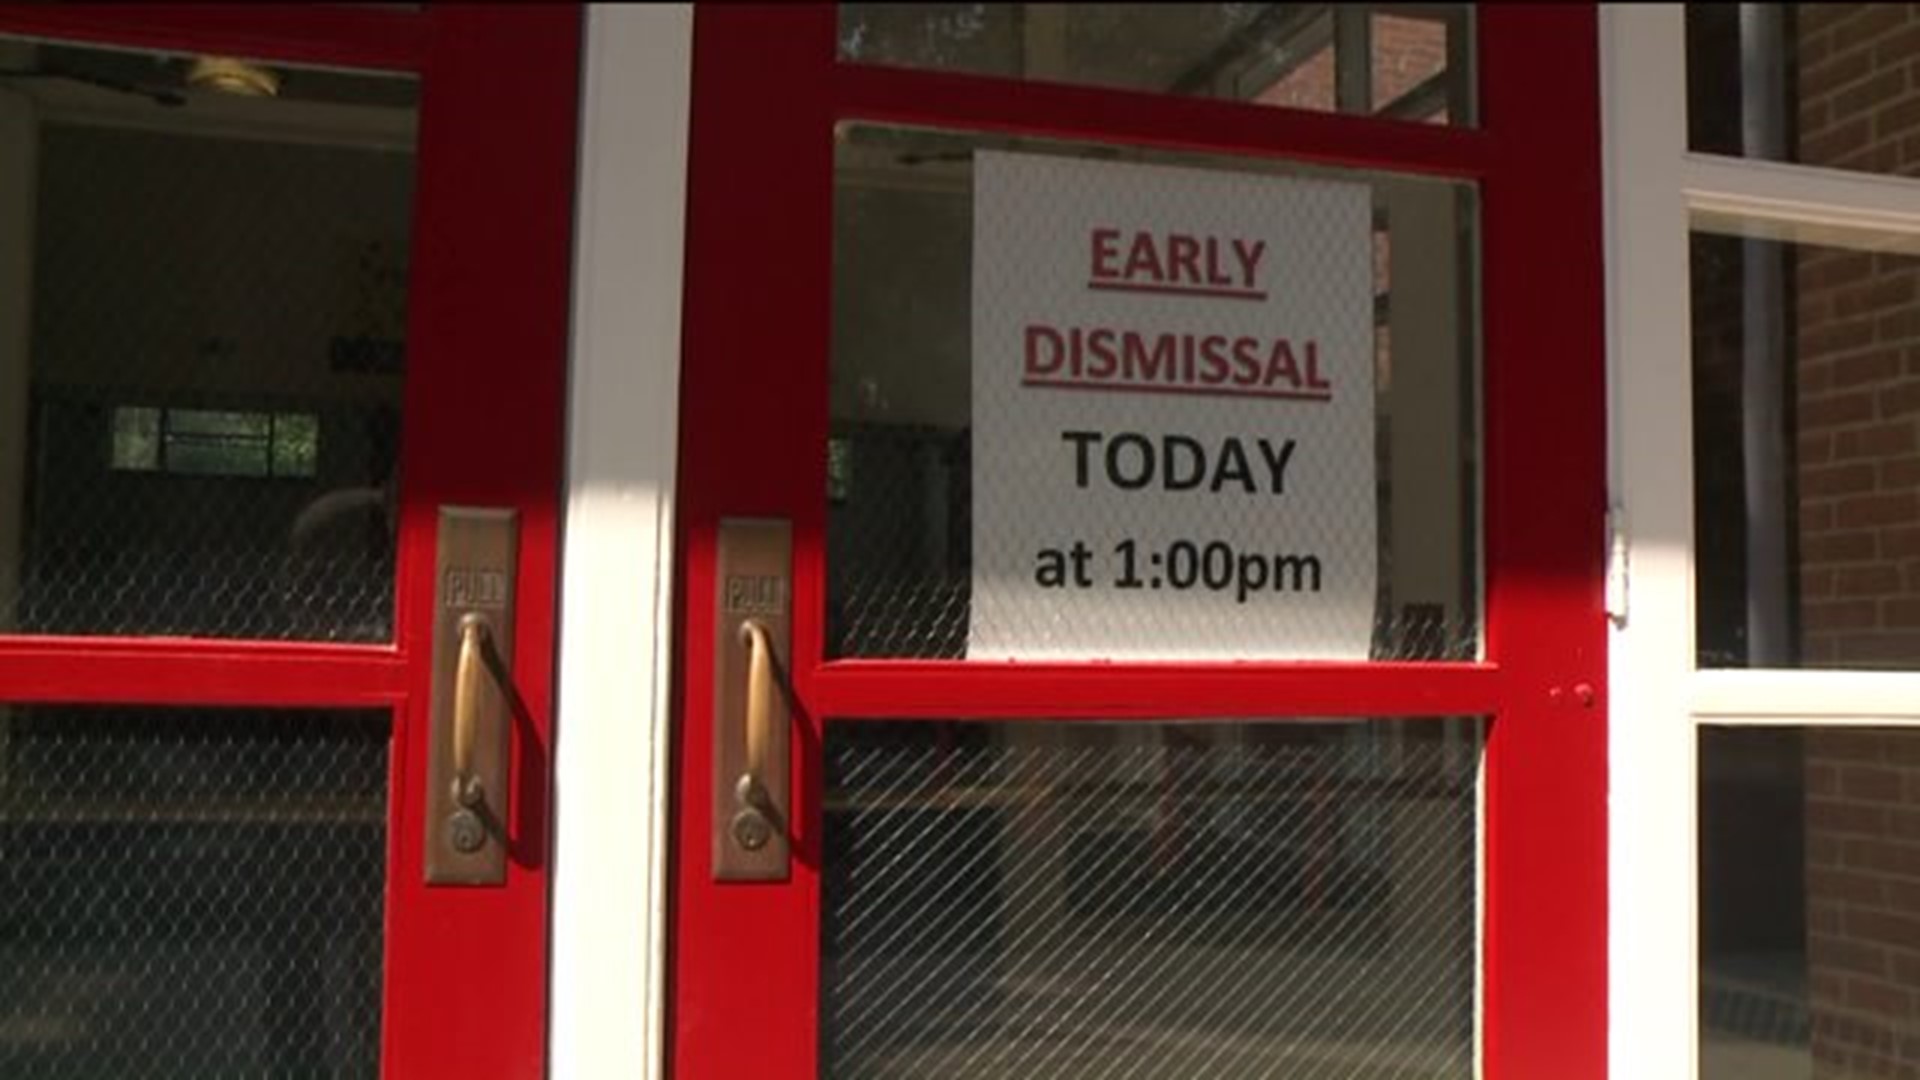 Schools without air conditioning have early dismissals as temperatures reach dangerous levels